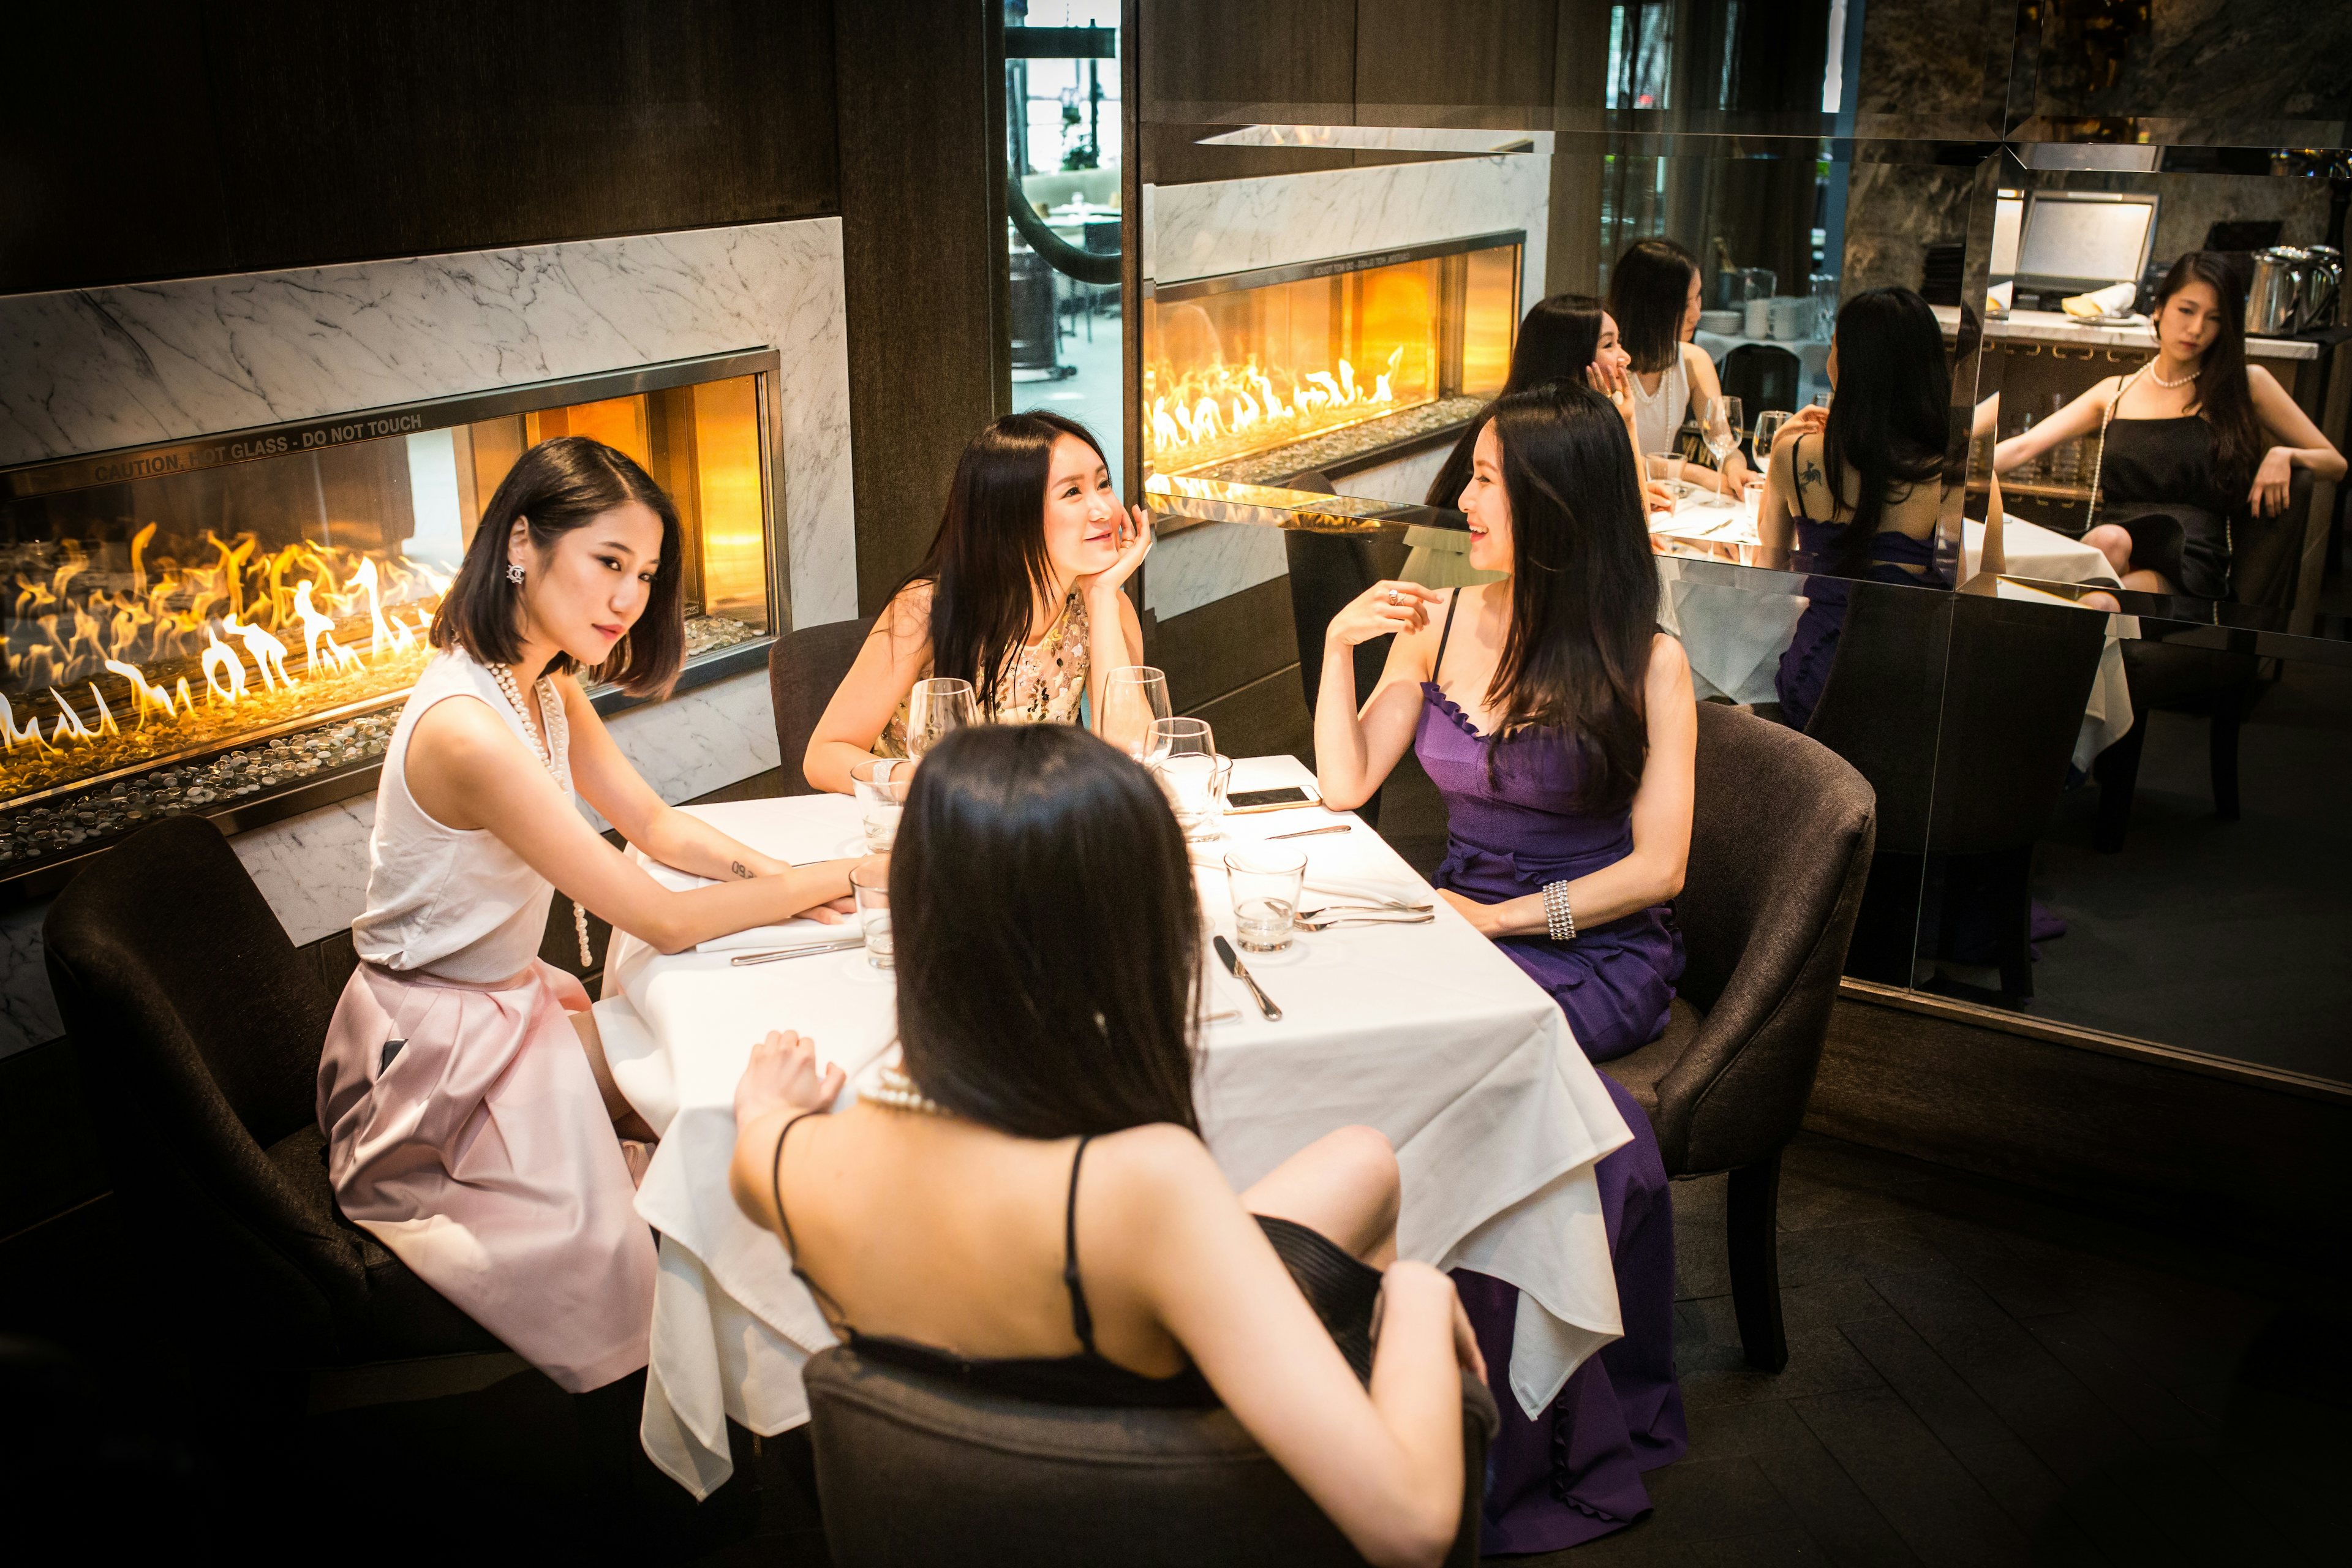 The cast of Ultra Rich Asian Girls of Vancouver. (Courtesy Photo)